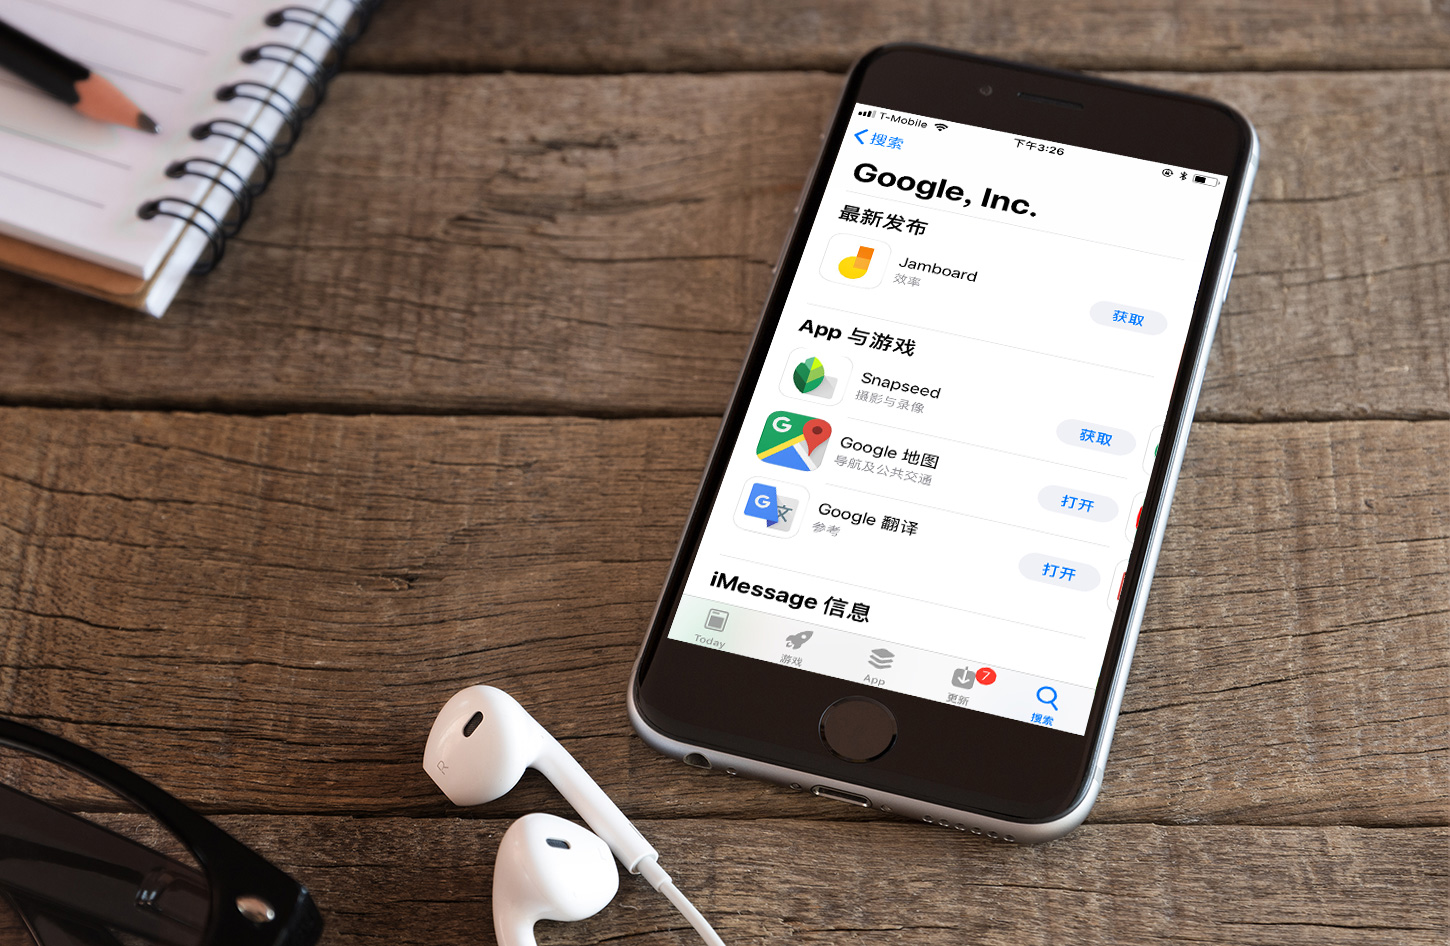 1Q18 was Google's Best Quarter in China in terms of iOS downloads